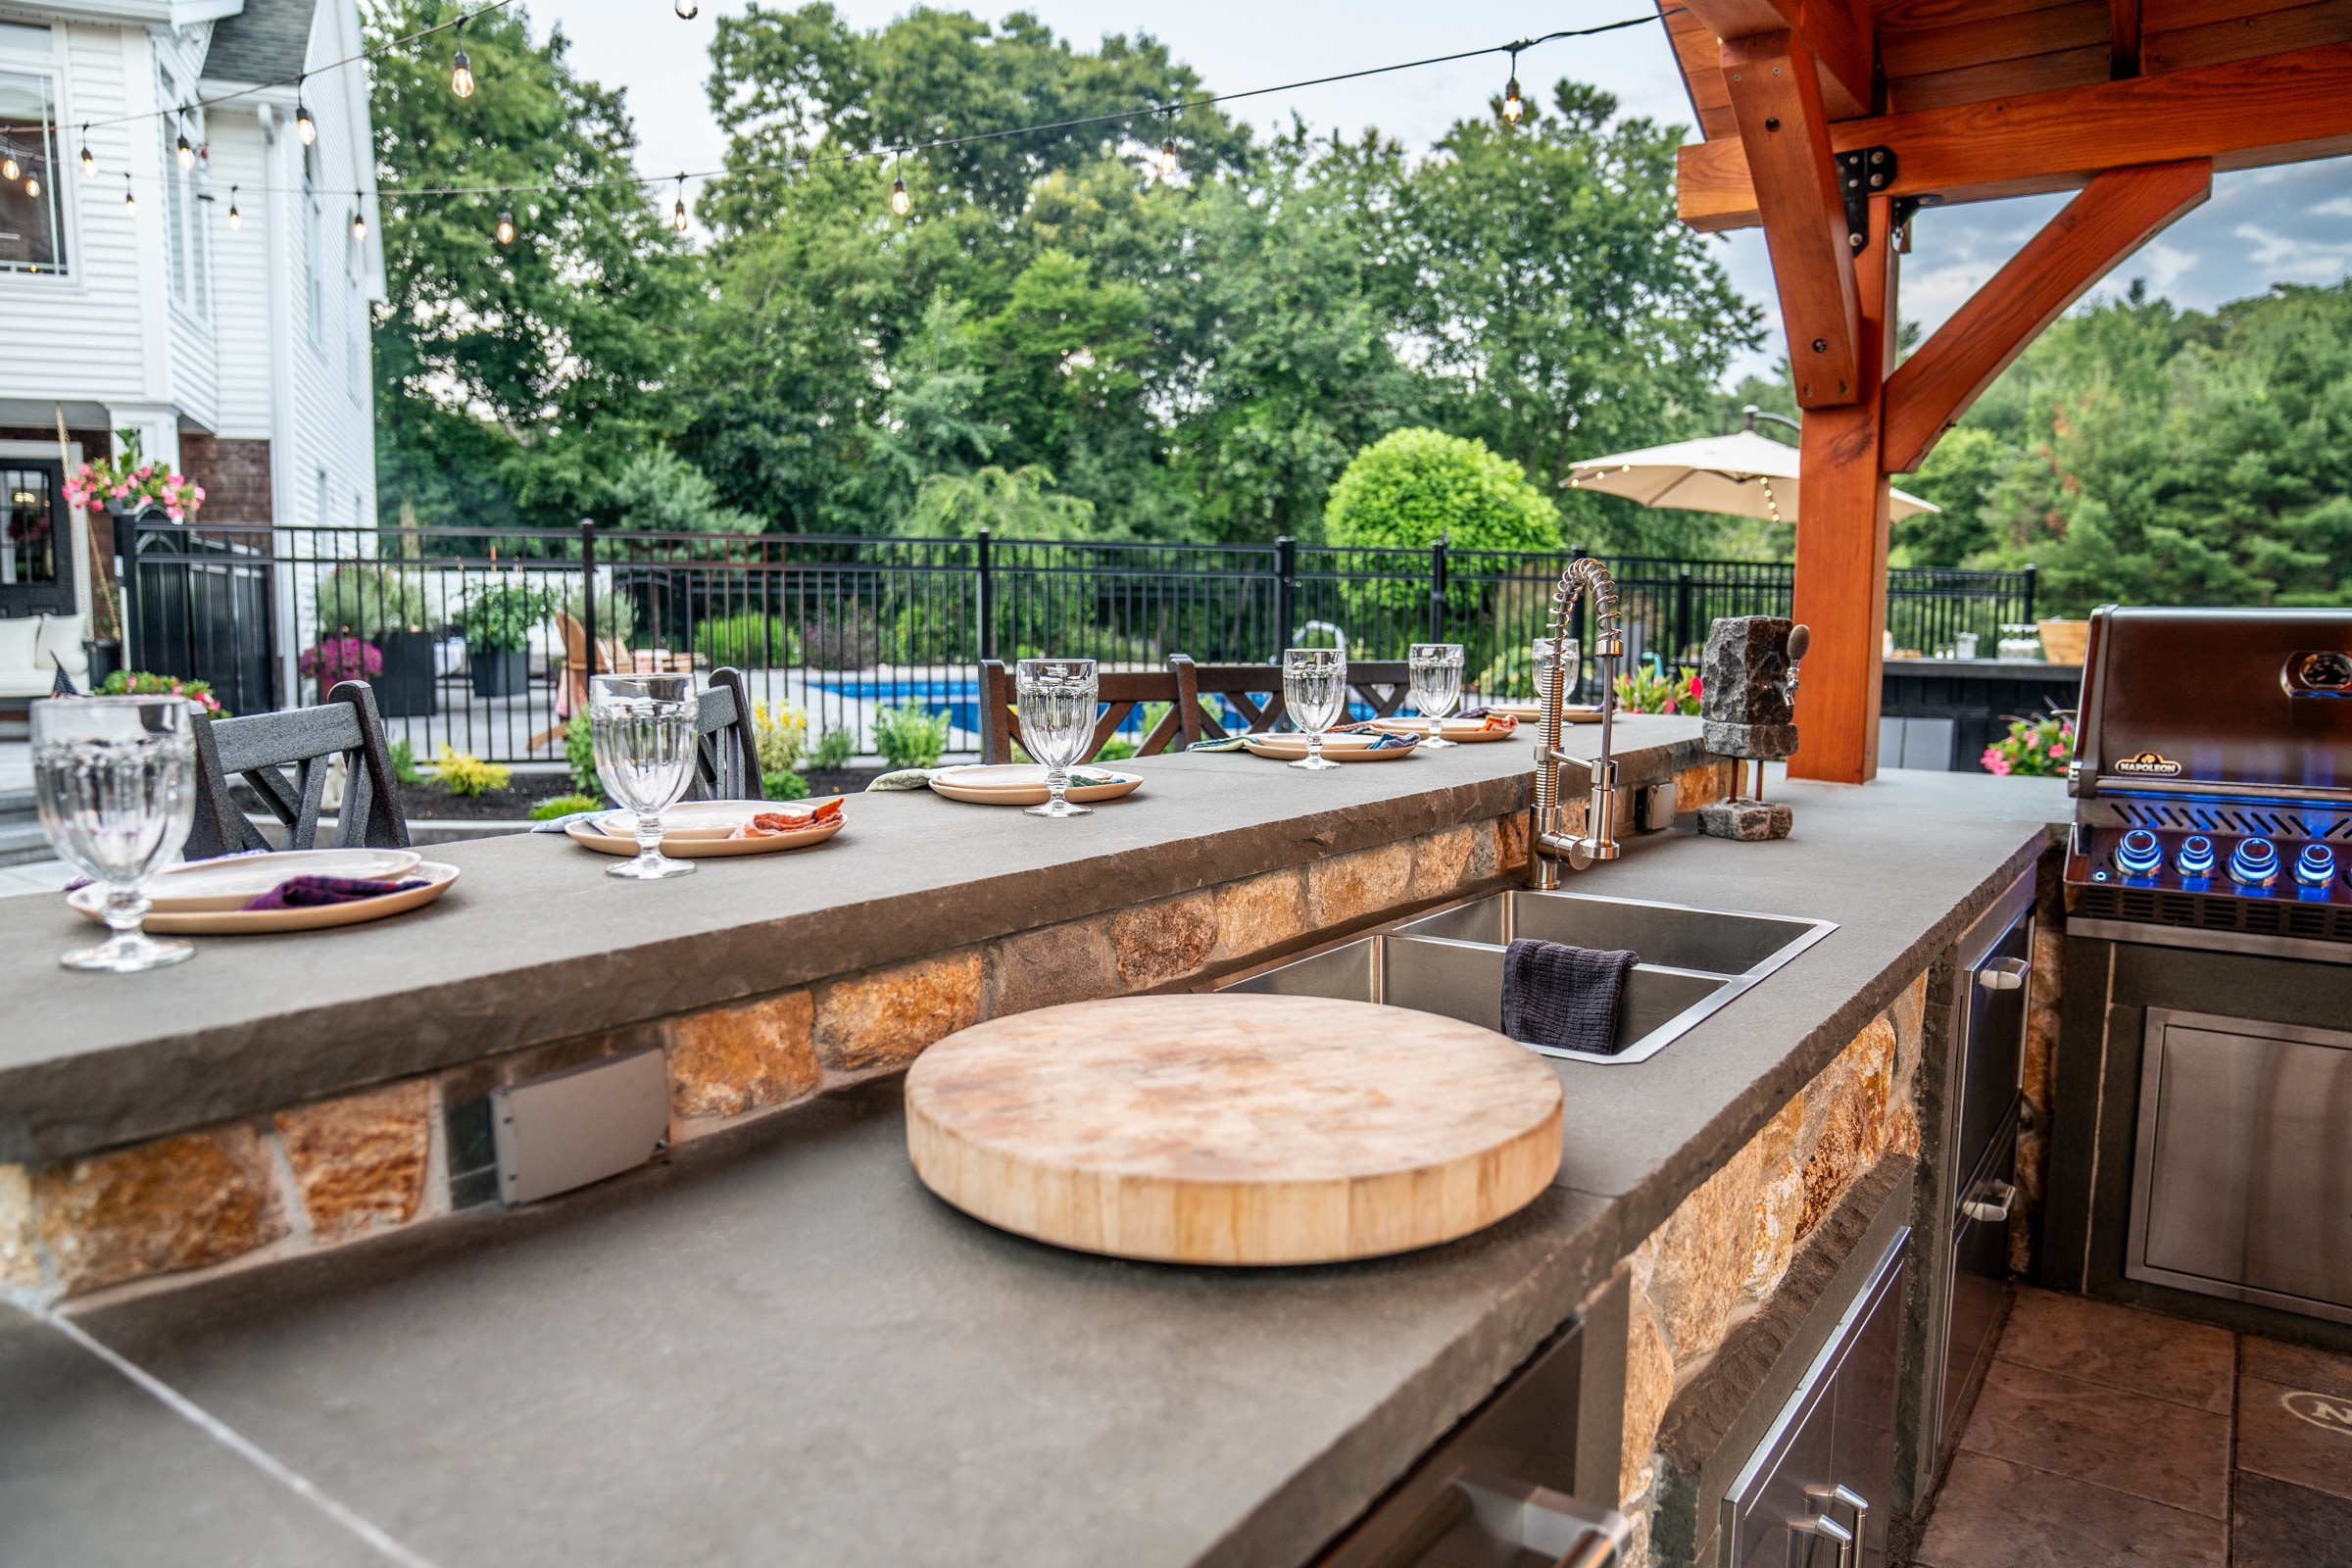 Venetian bluestone countertops were used for the food preparation space in this outdoor kitchen.